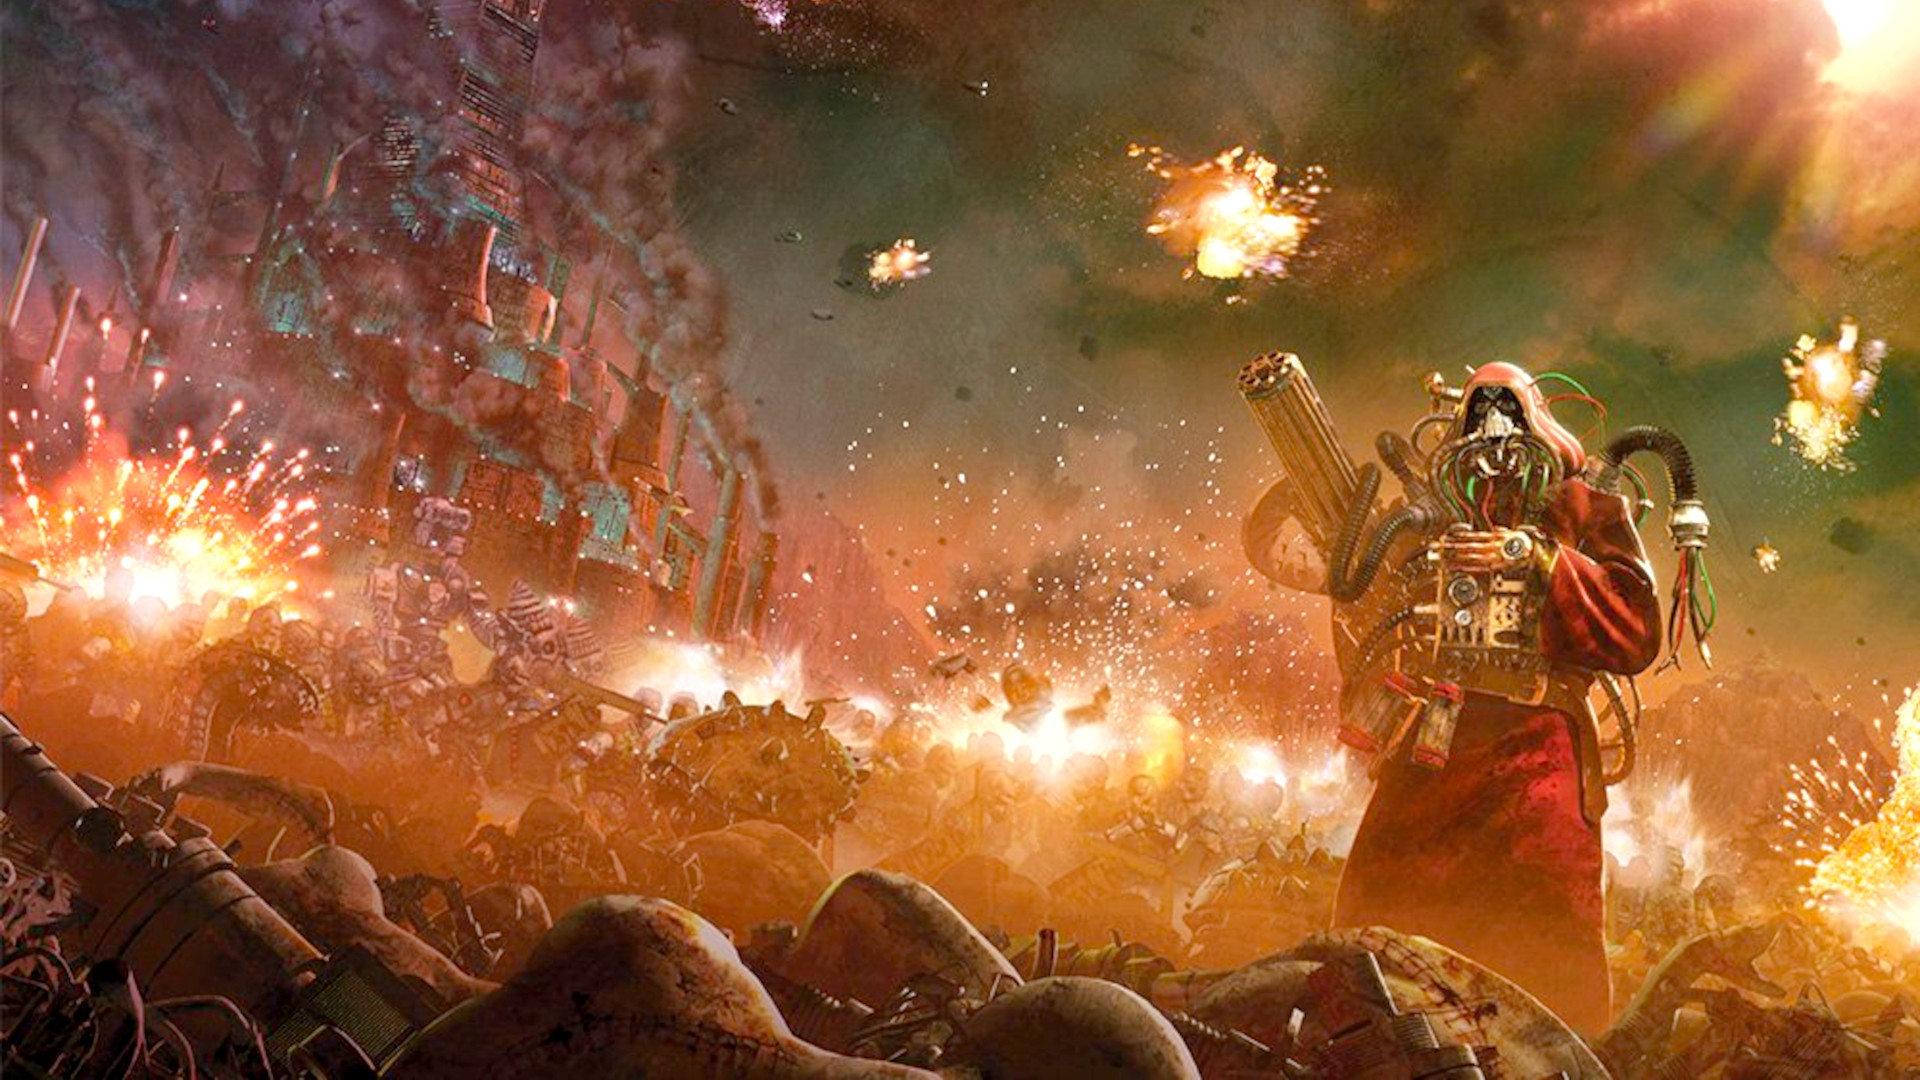 Warhammer 40k who is the Arkifane - Games Workshop image showing an artwork with a Dark Mechanicum tech priest on a Horus Heresy battlefield